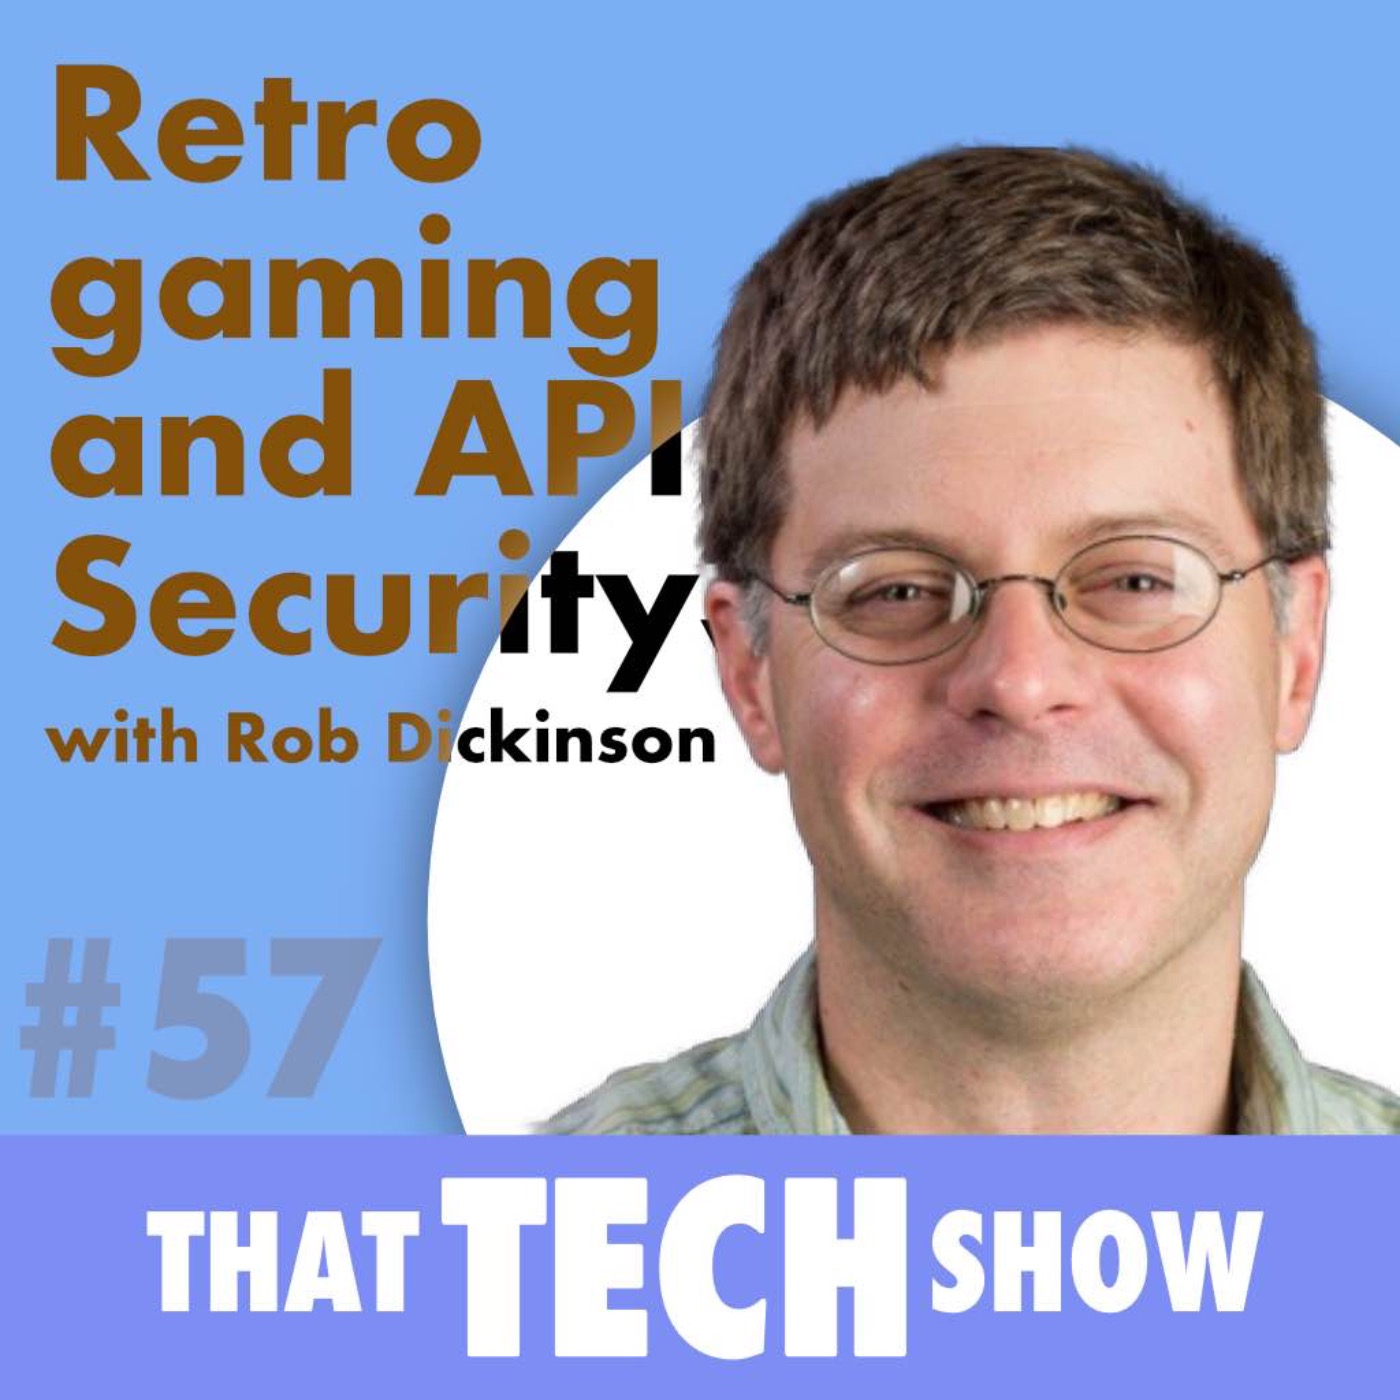 Episode 57 - Retro Gaming and API Security with Rob Dickinson